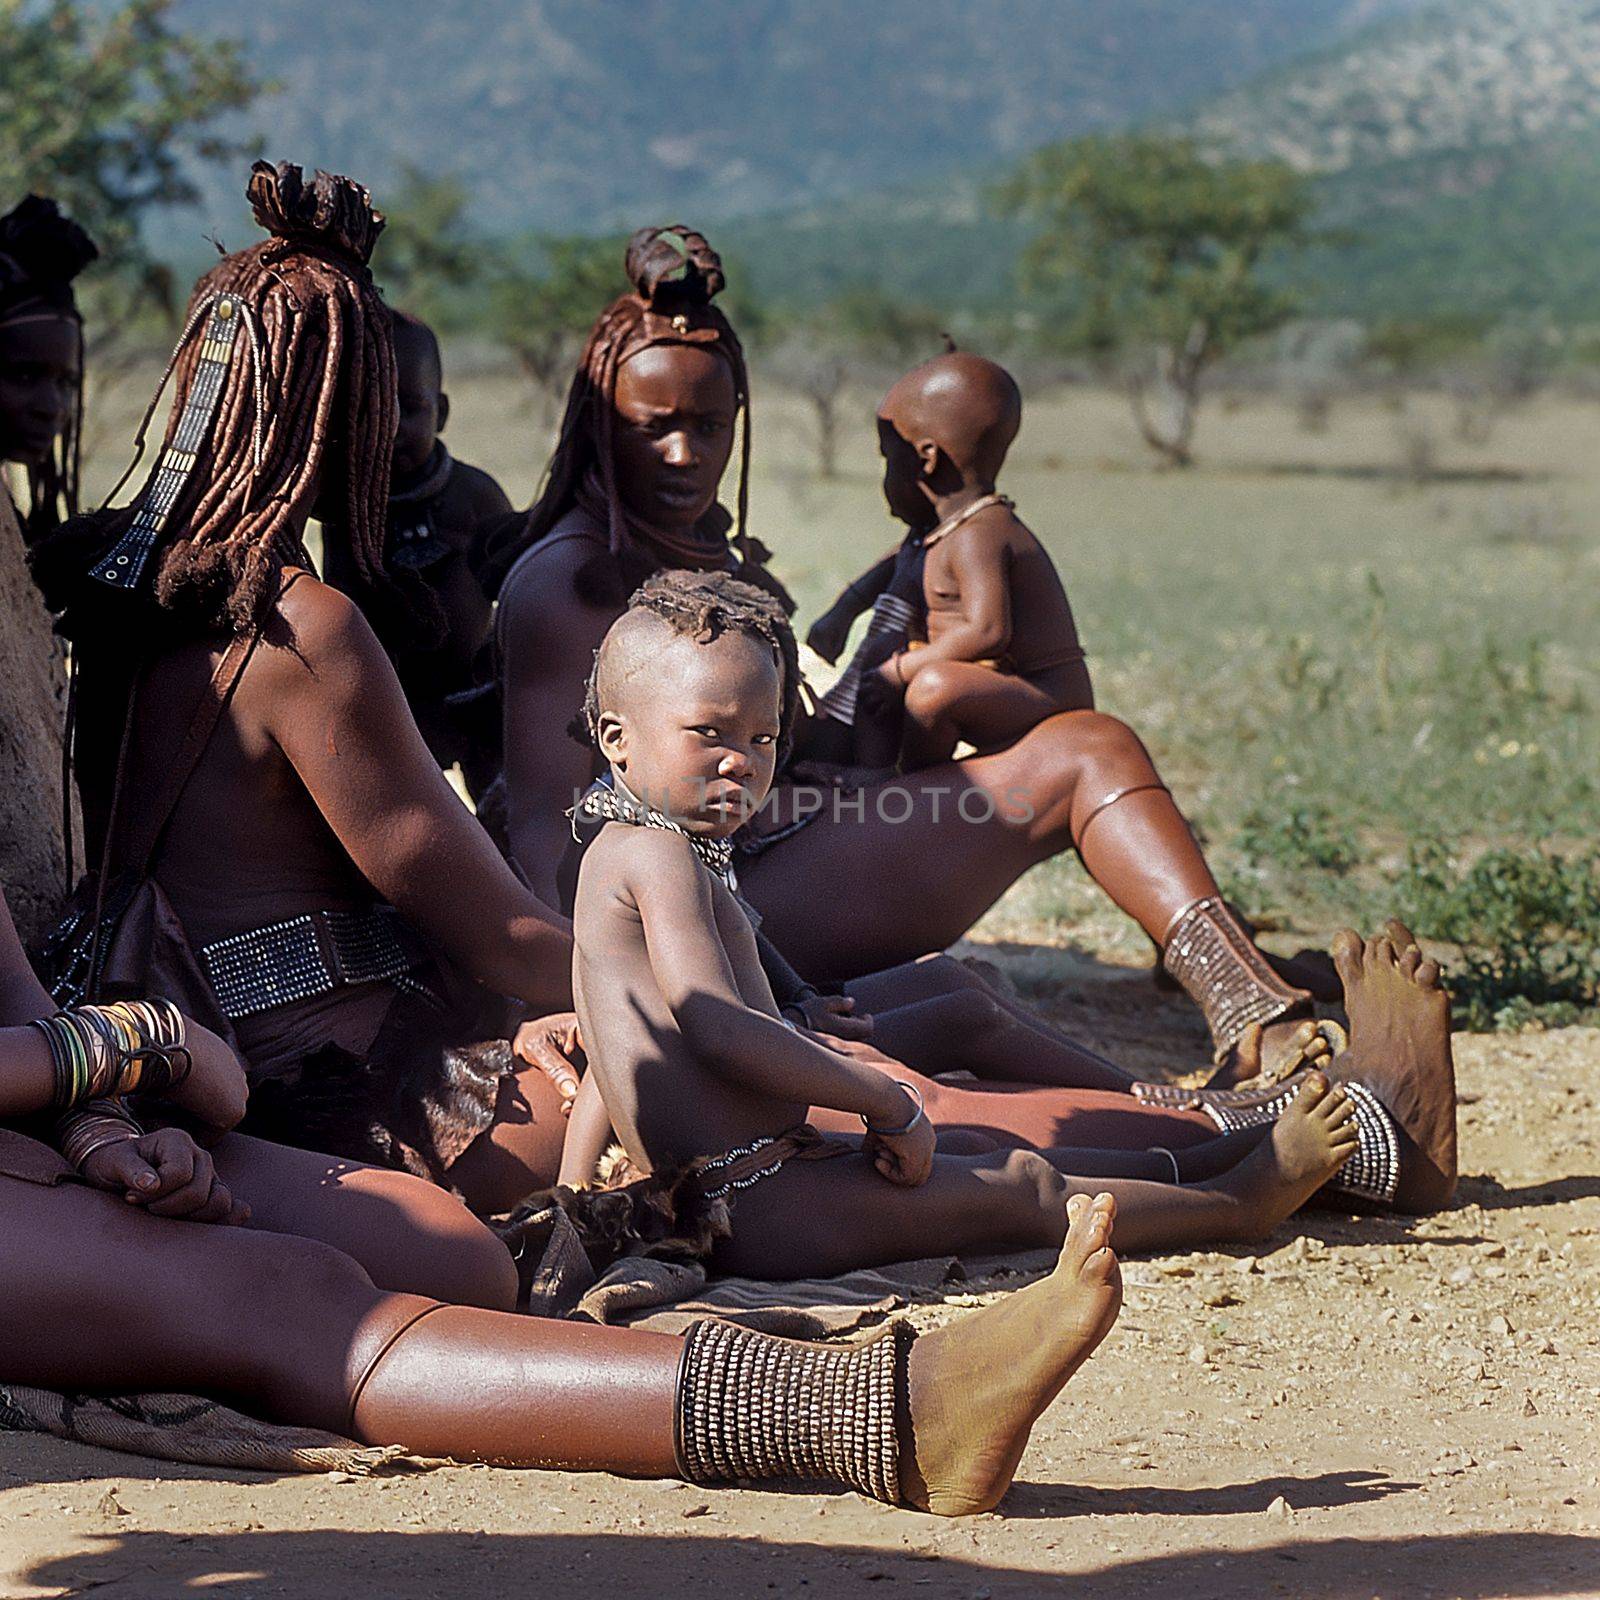 May 15, 2005. Himba women do not identify and their children with traditional hairstyle, necklace and typical ocher skin. Epupa Falls, Kaokoland or Kunene Province, Namibia, Africa